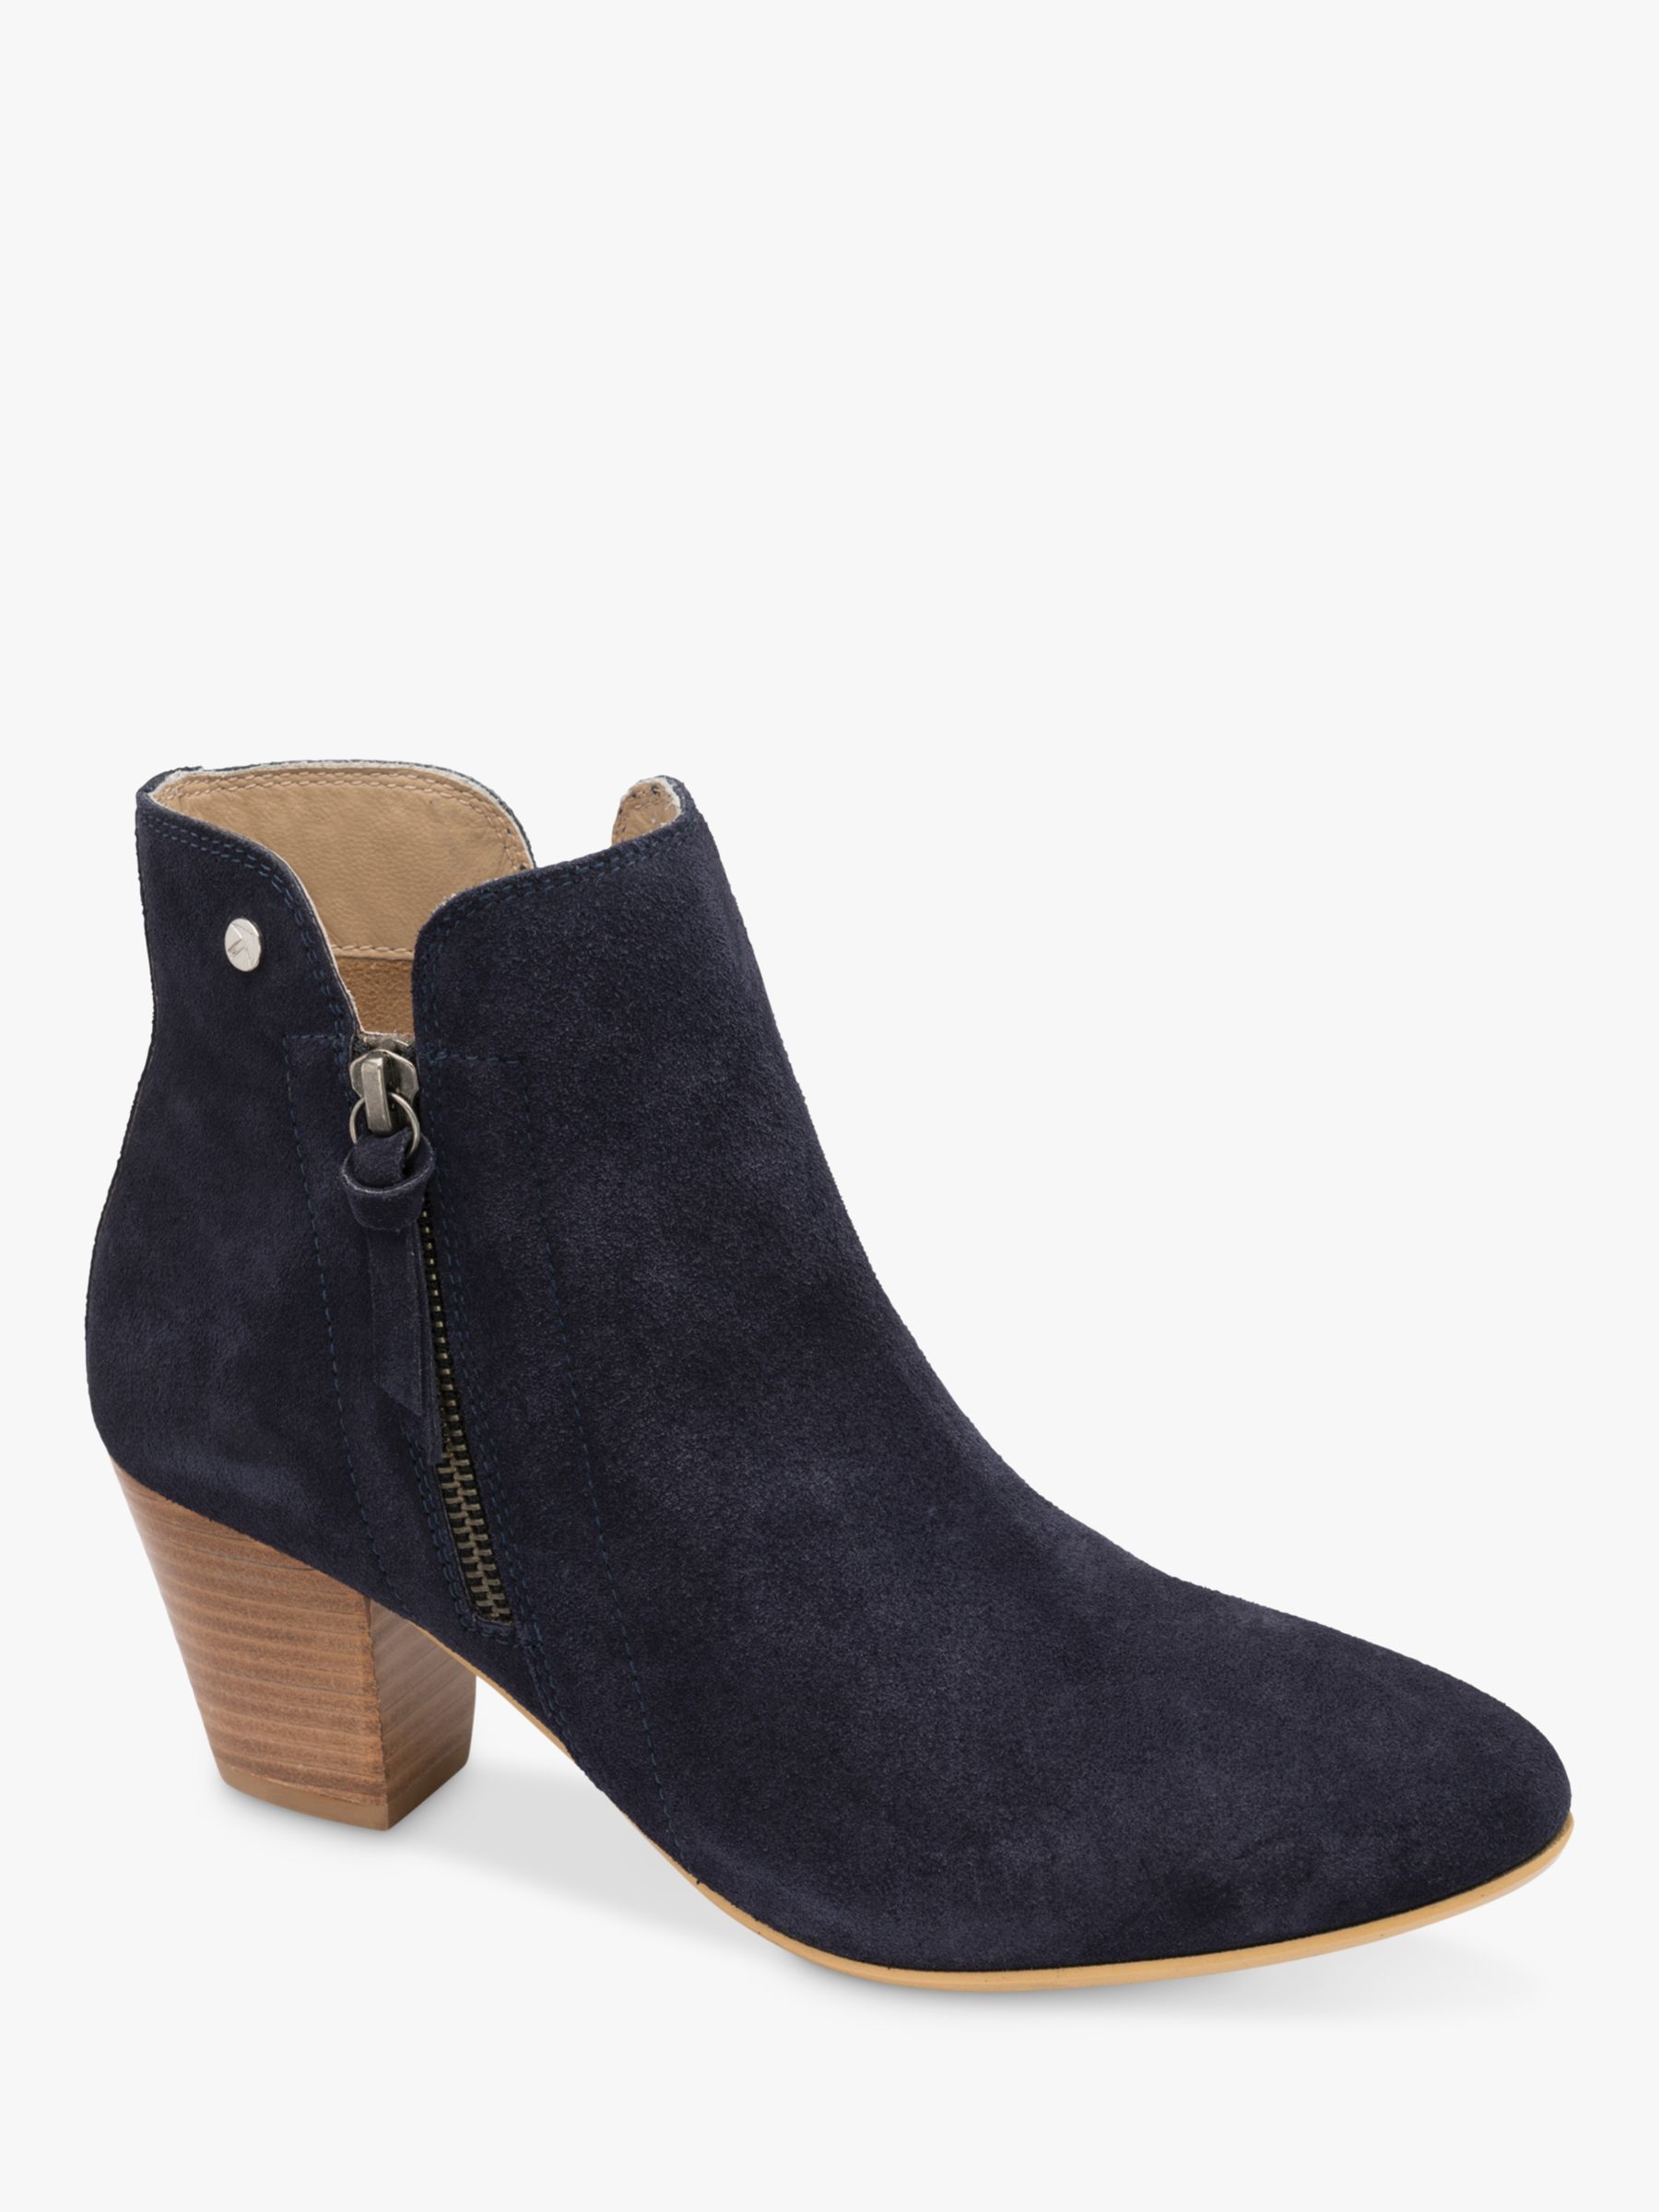 Ravel Suede Ankle Boots, Navy at & Partners